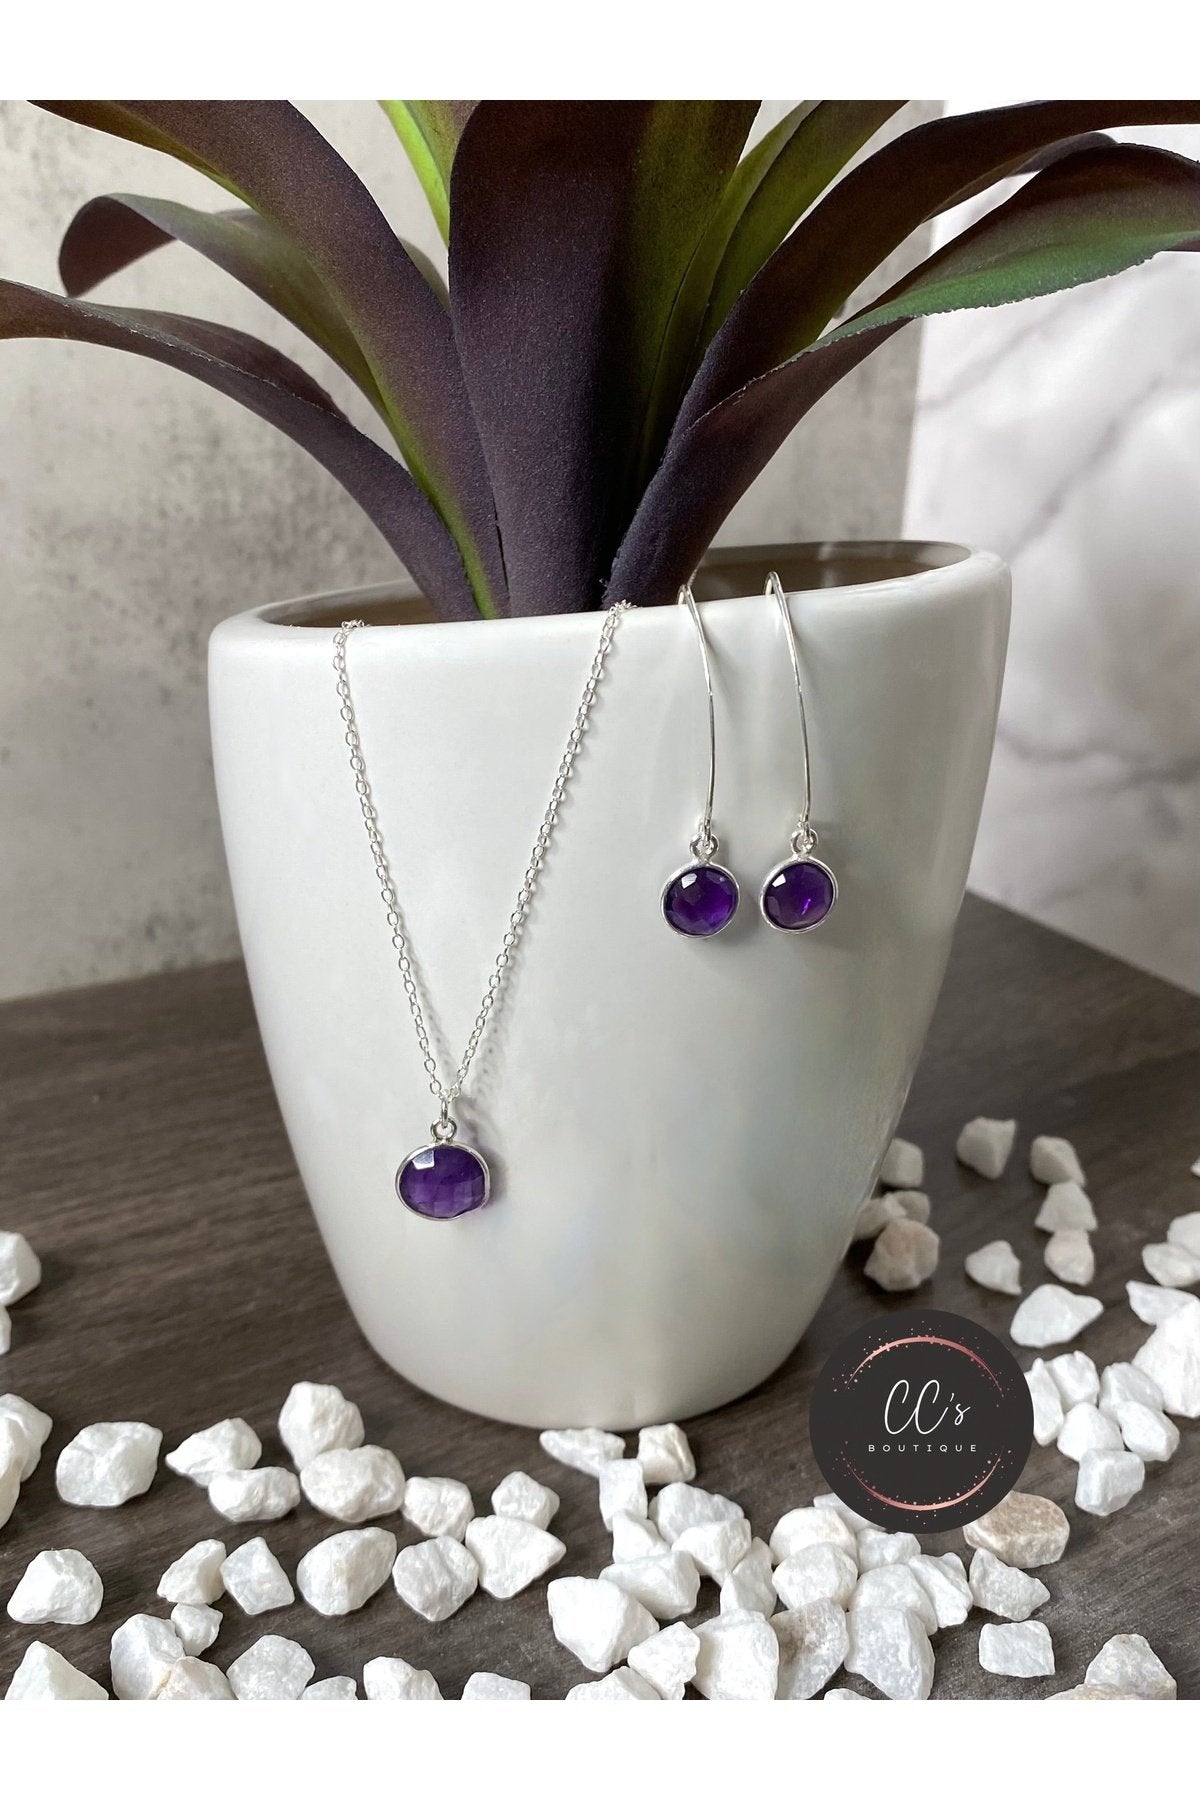 Round Amethyst Necklace in Sterling Silver